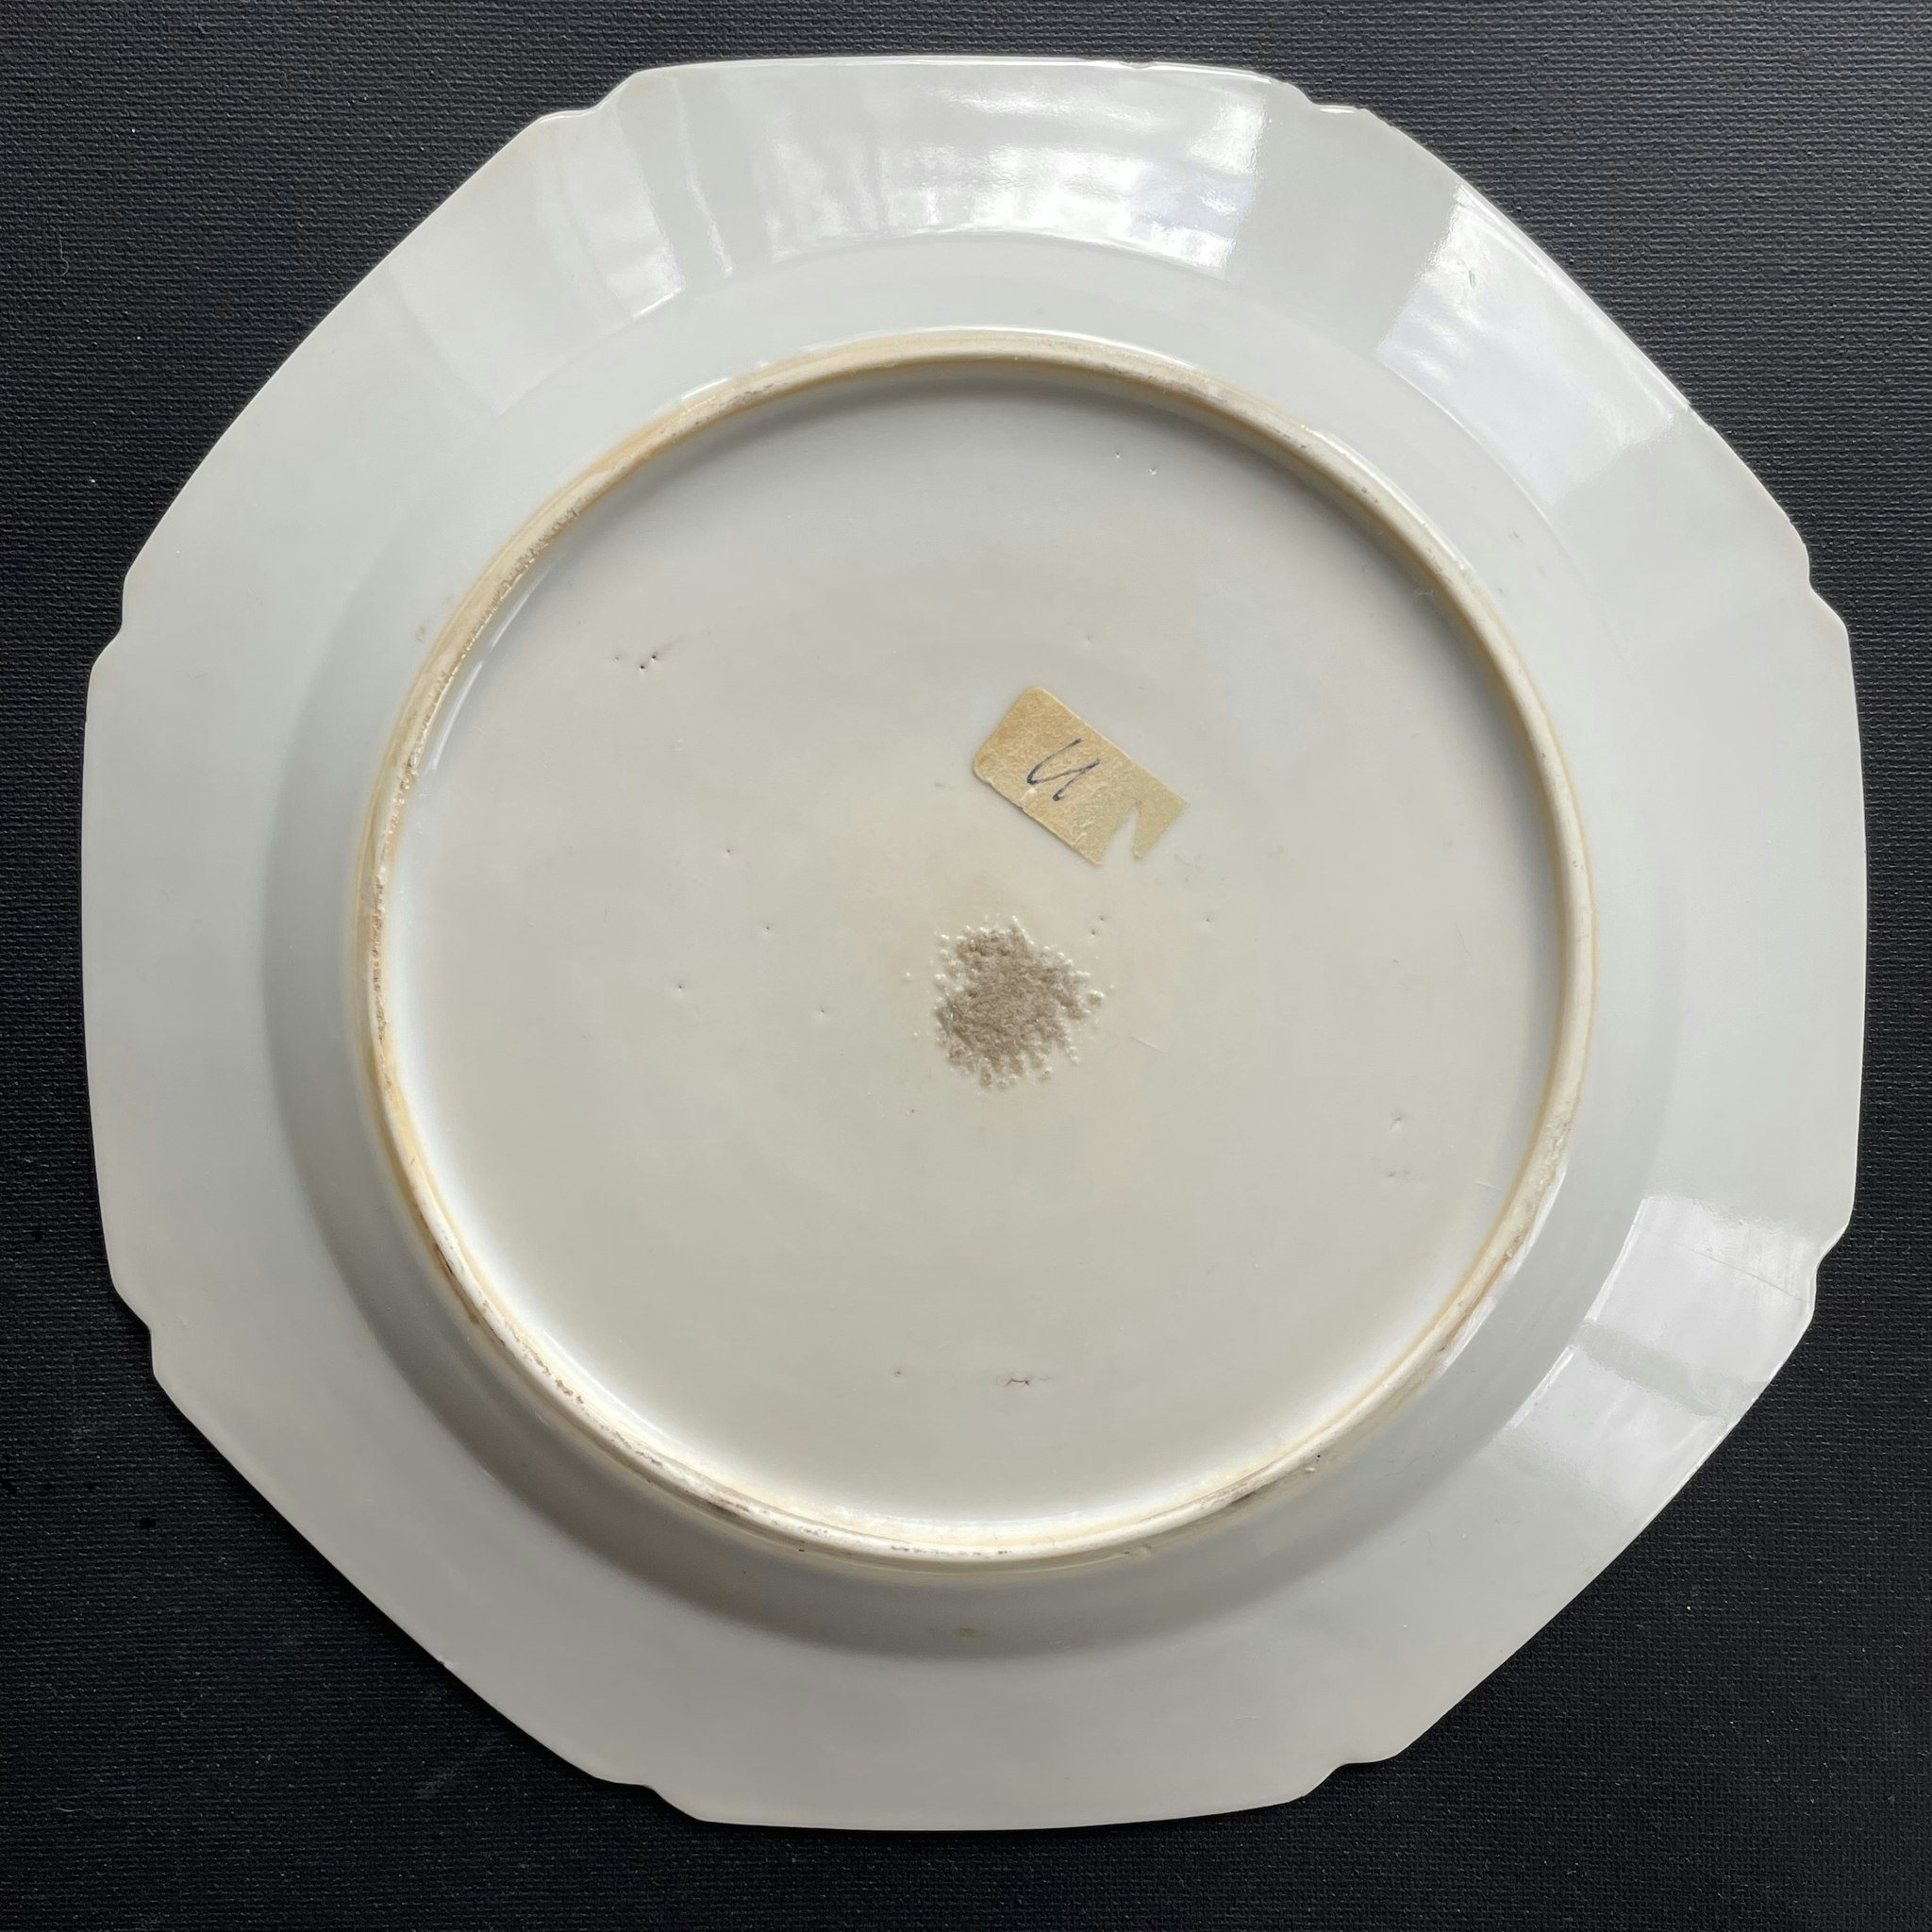 Antique Chinese plate in blue and white, Qianlong period #1426